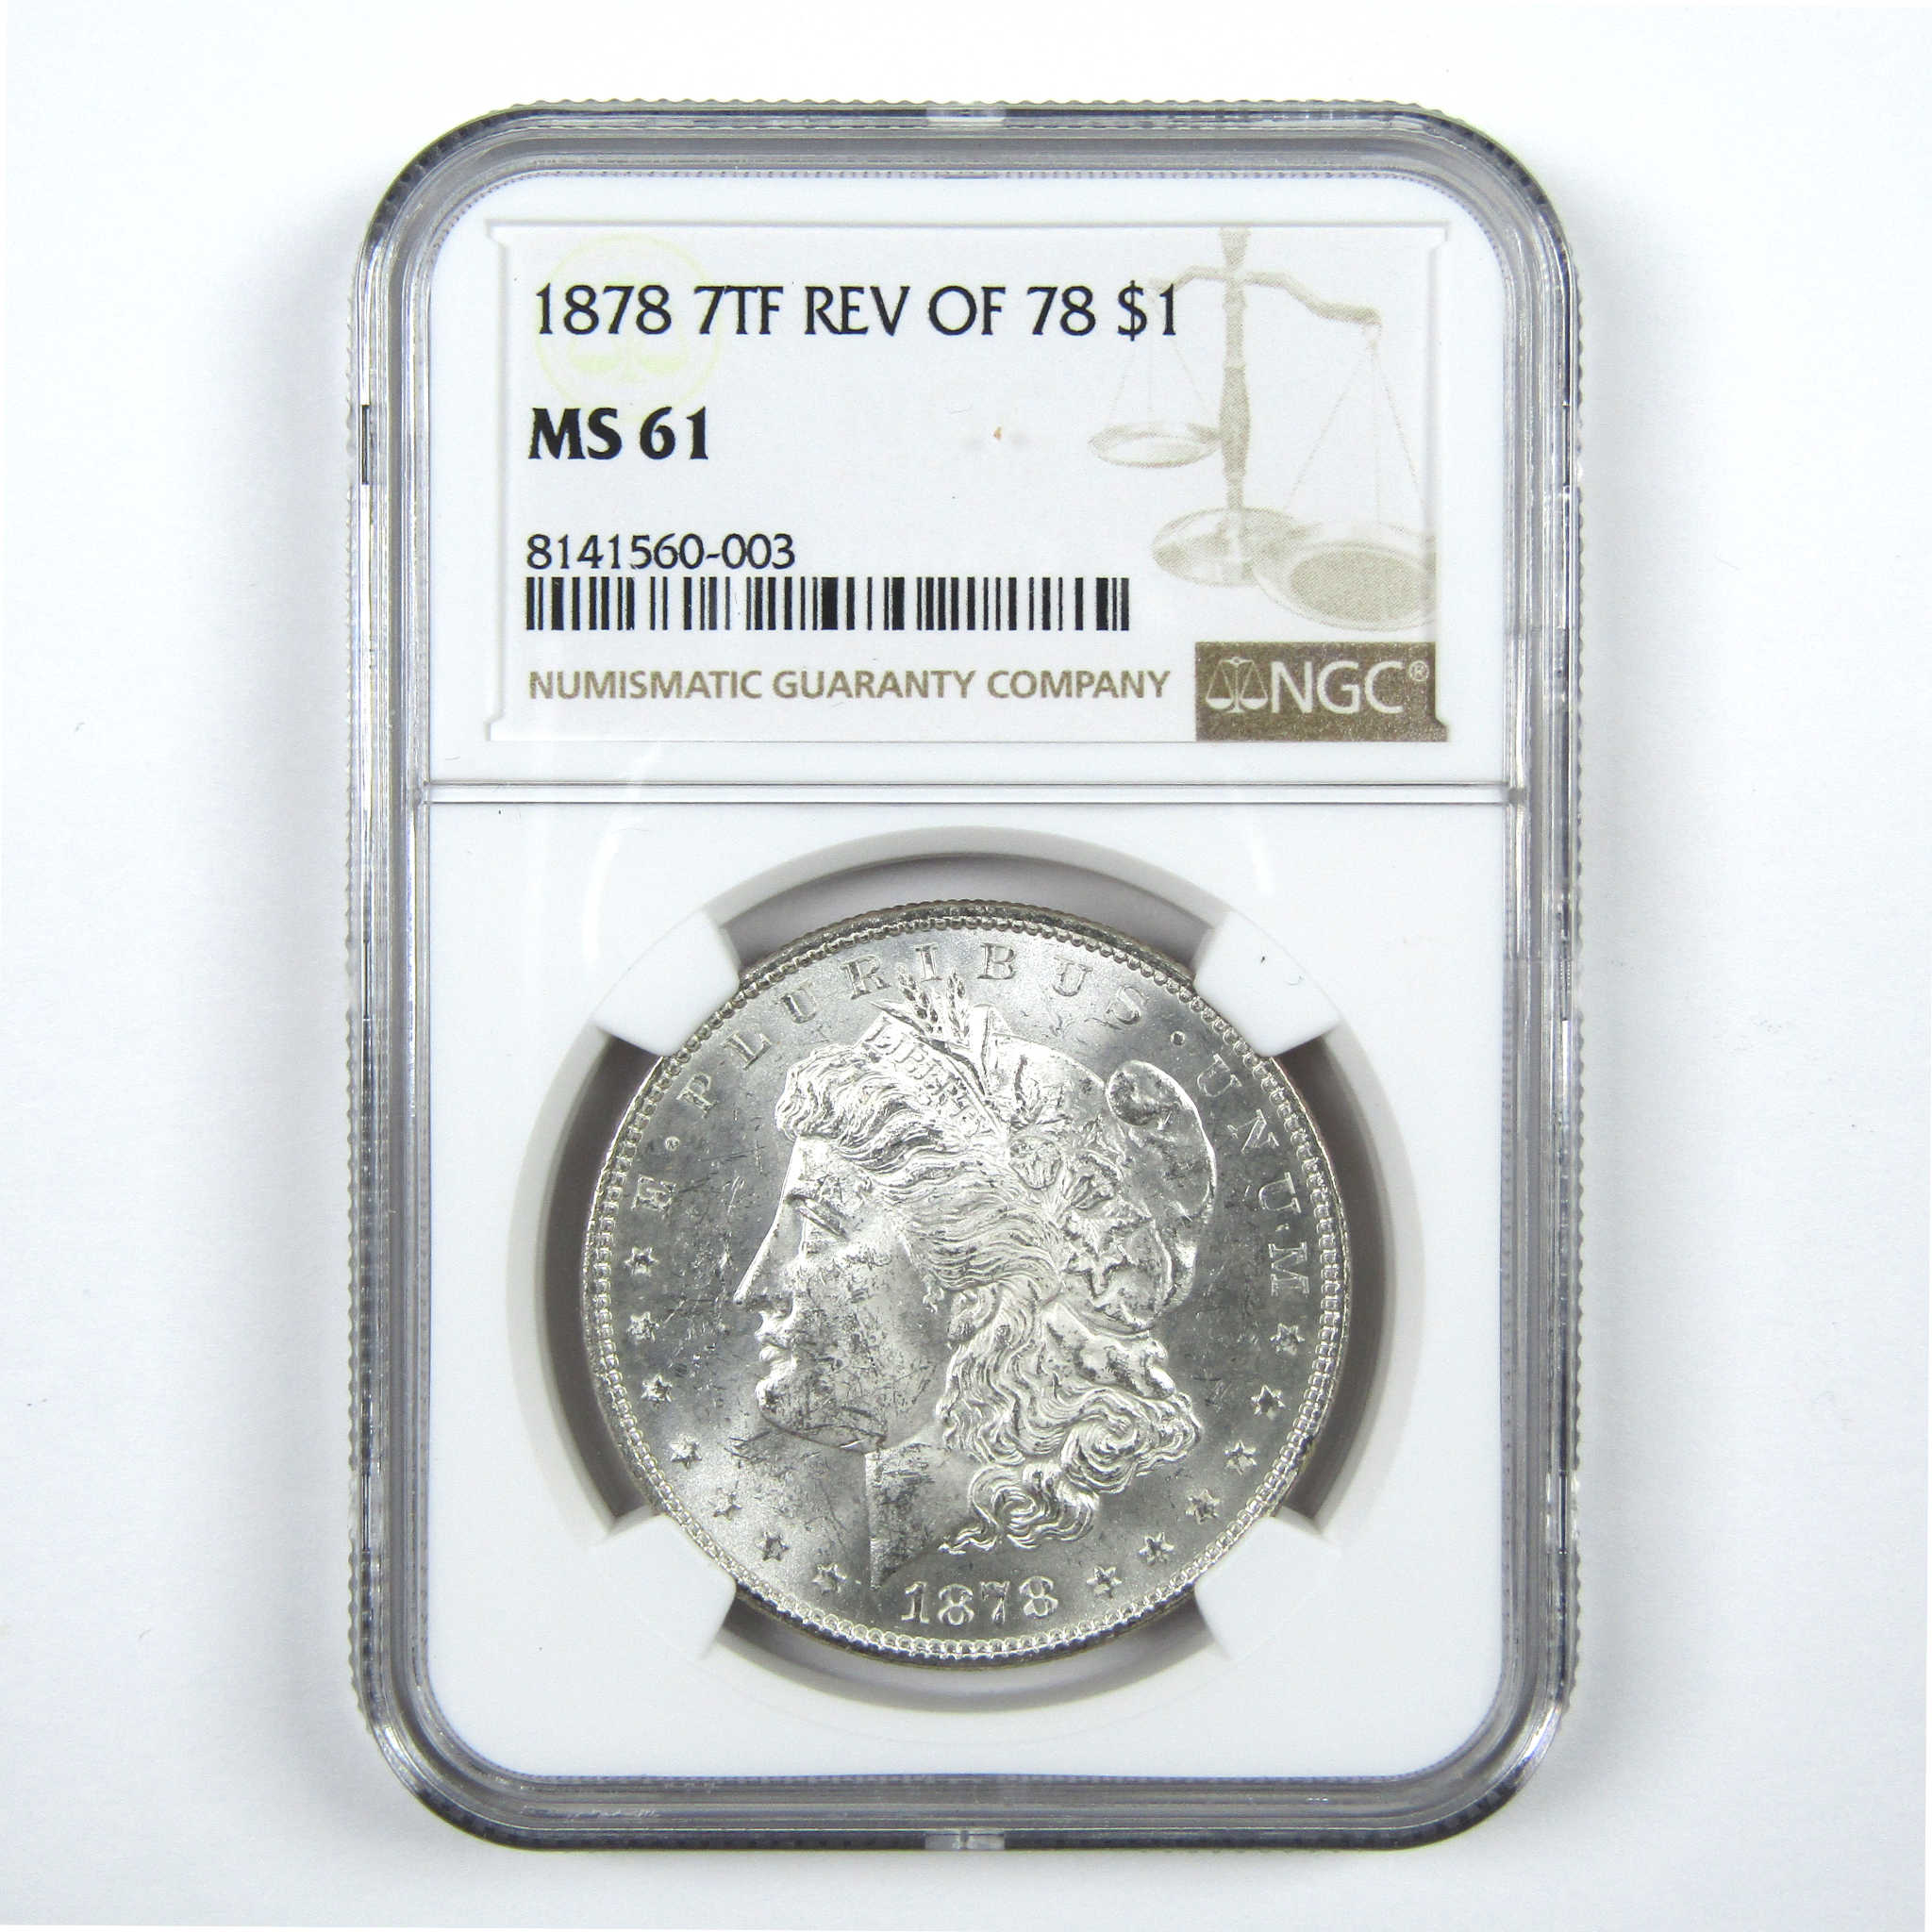 1878 7TF Rev 78 Morgan Dollar MS 61 NGC Uncirculated SKU:I14028 - Morgan coin - Morgan silver dollar - Morgan silver dollar for sale - Profile Coins &amp; Collectibles